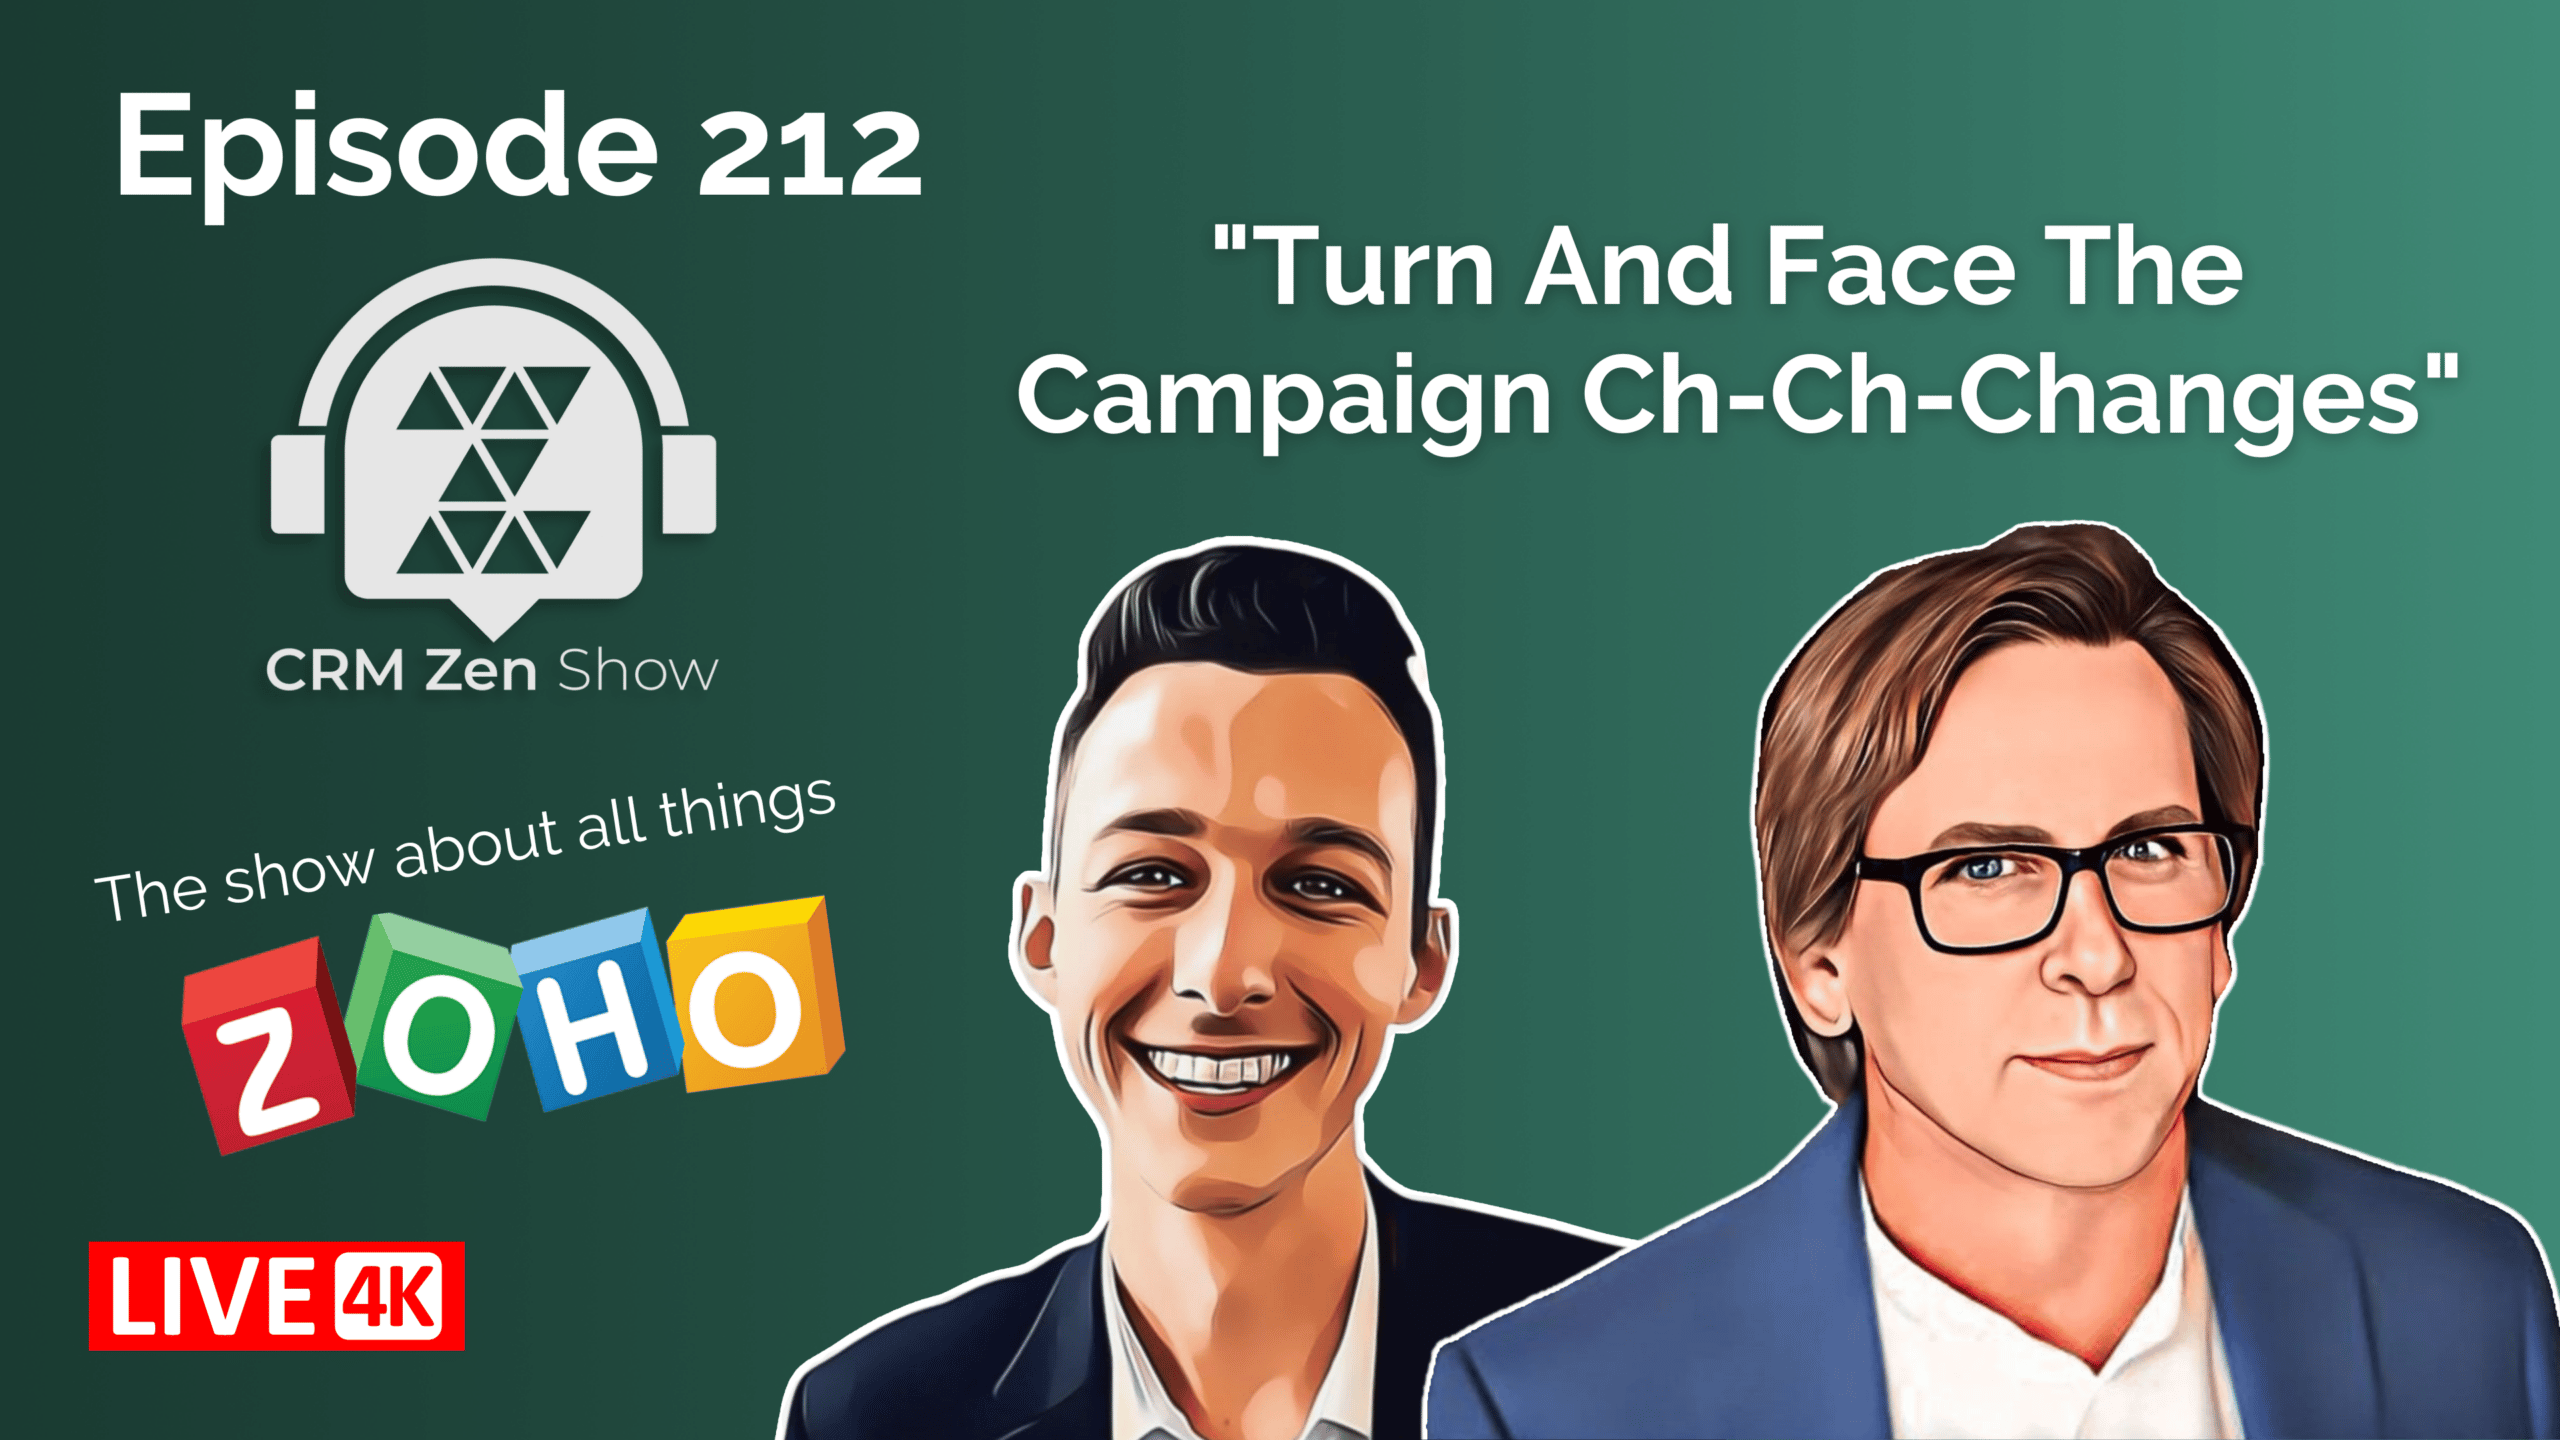 CRM Zen Show Episode 212 - Turn And Face The Campaign Ch-ch-changes